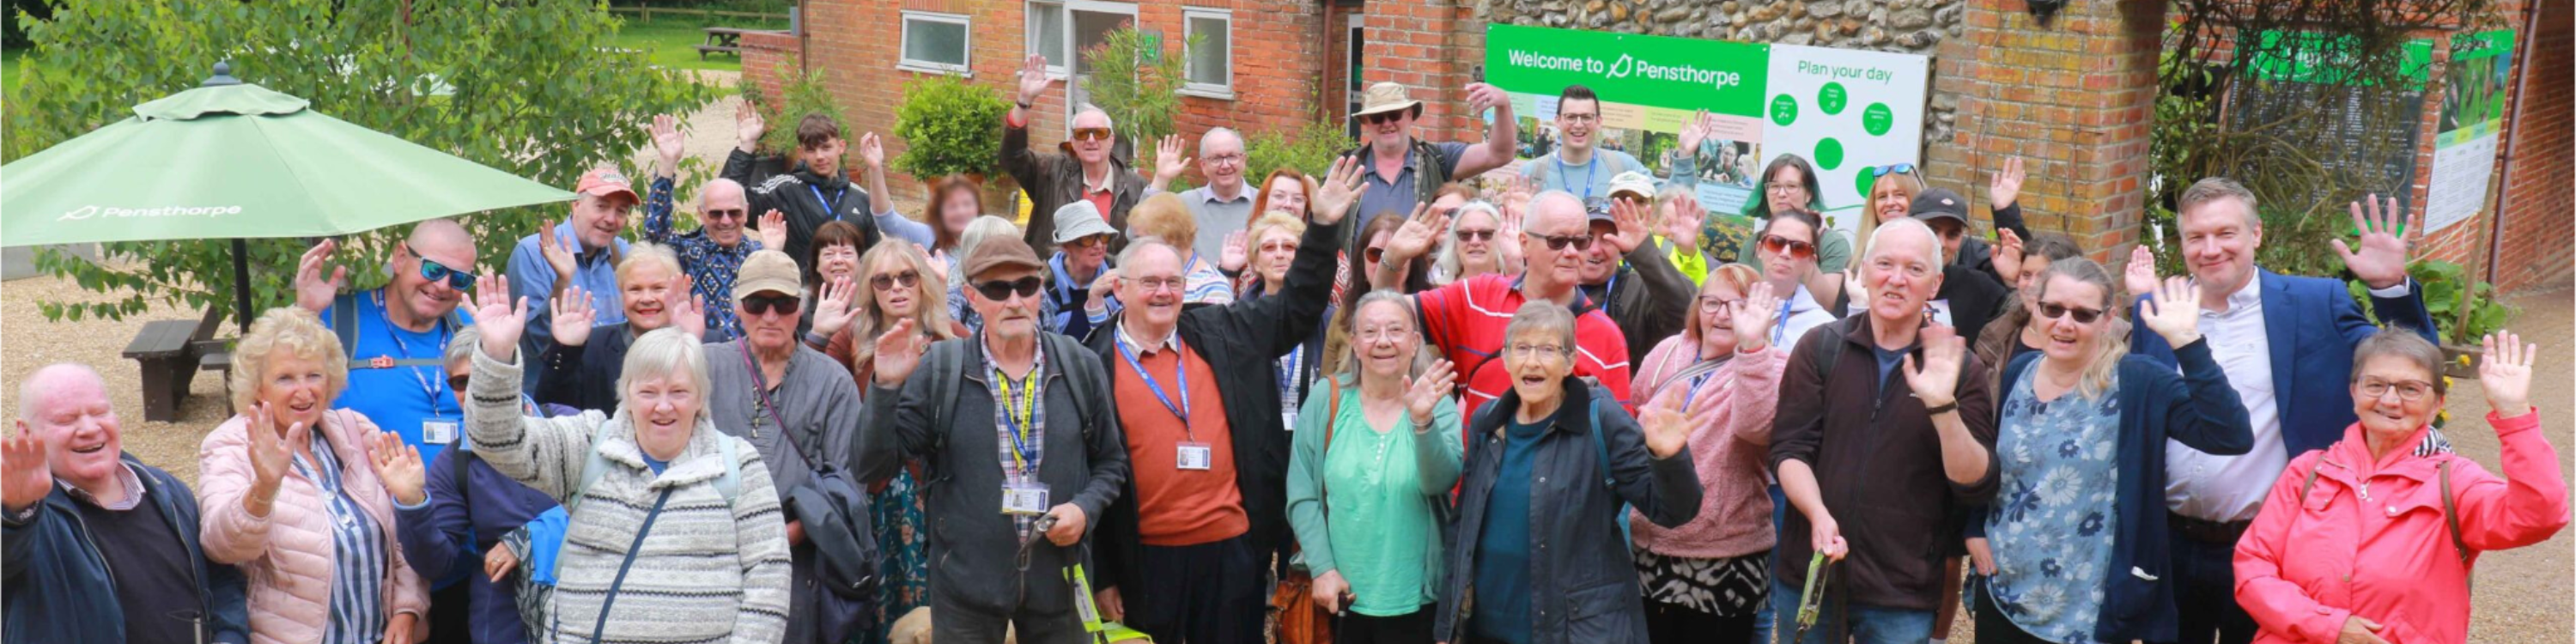 A group of volunteers, guide dogs and Vision Norfolk staff waving at the camera outside of Pensthorpe Nature Reserve in Fakenham.